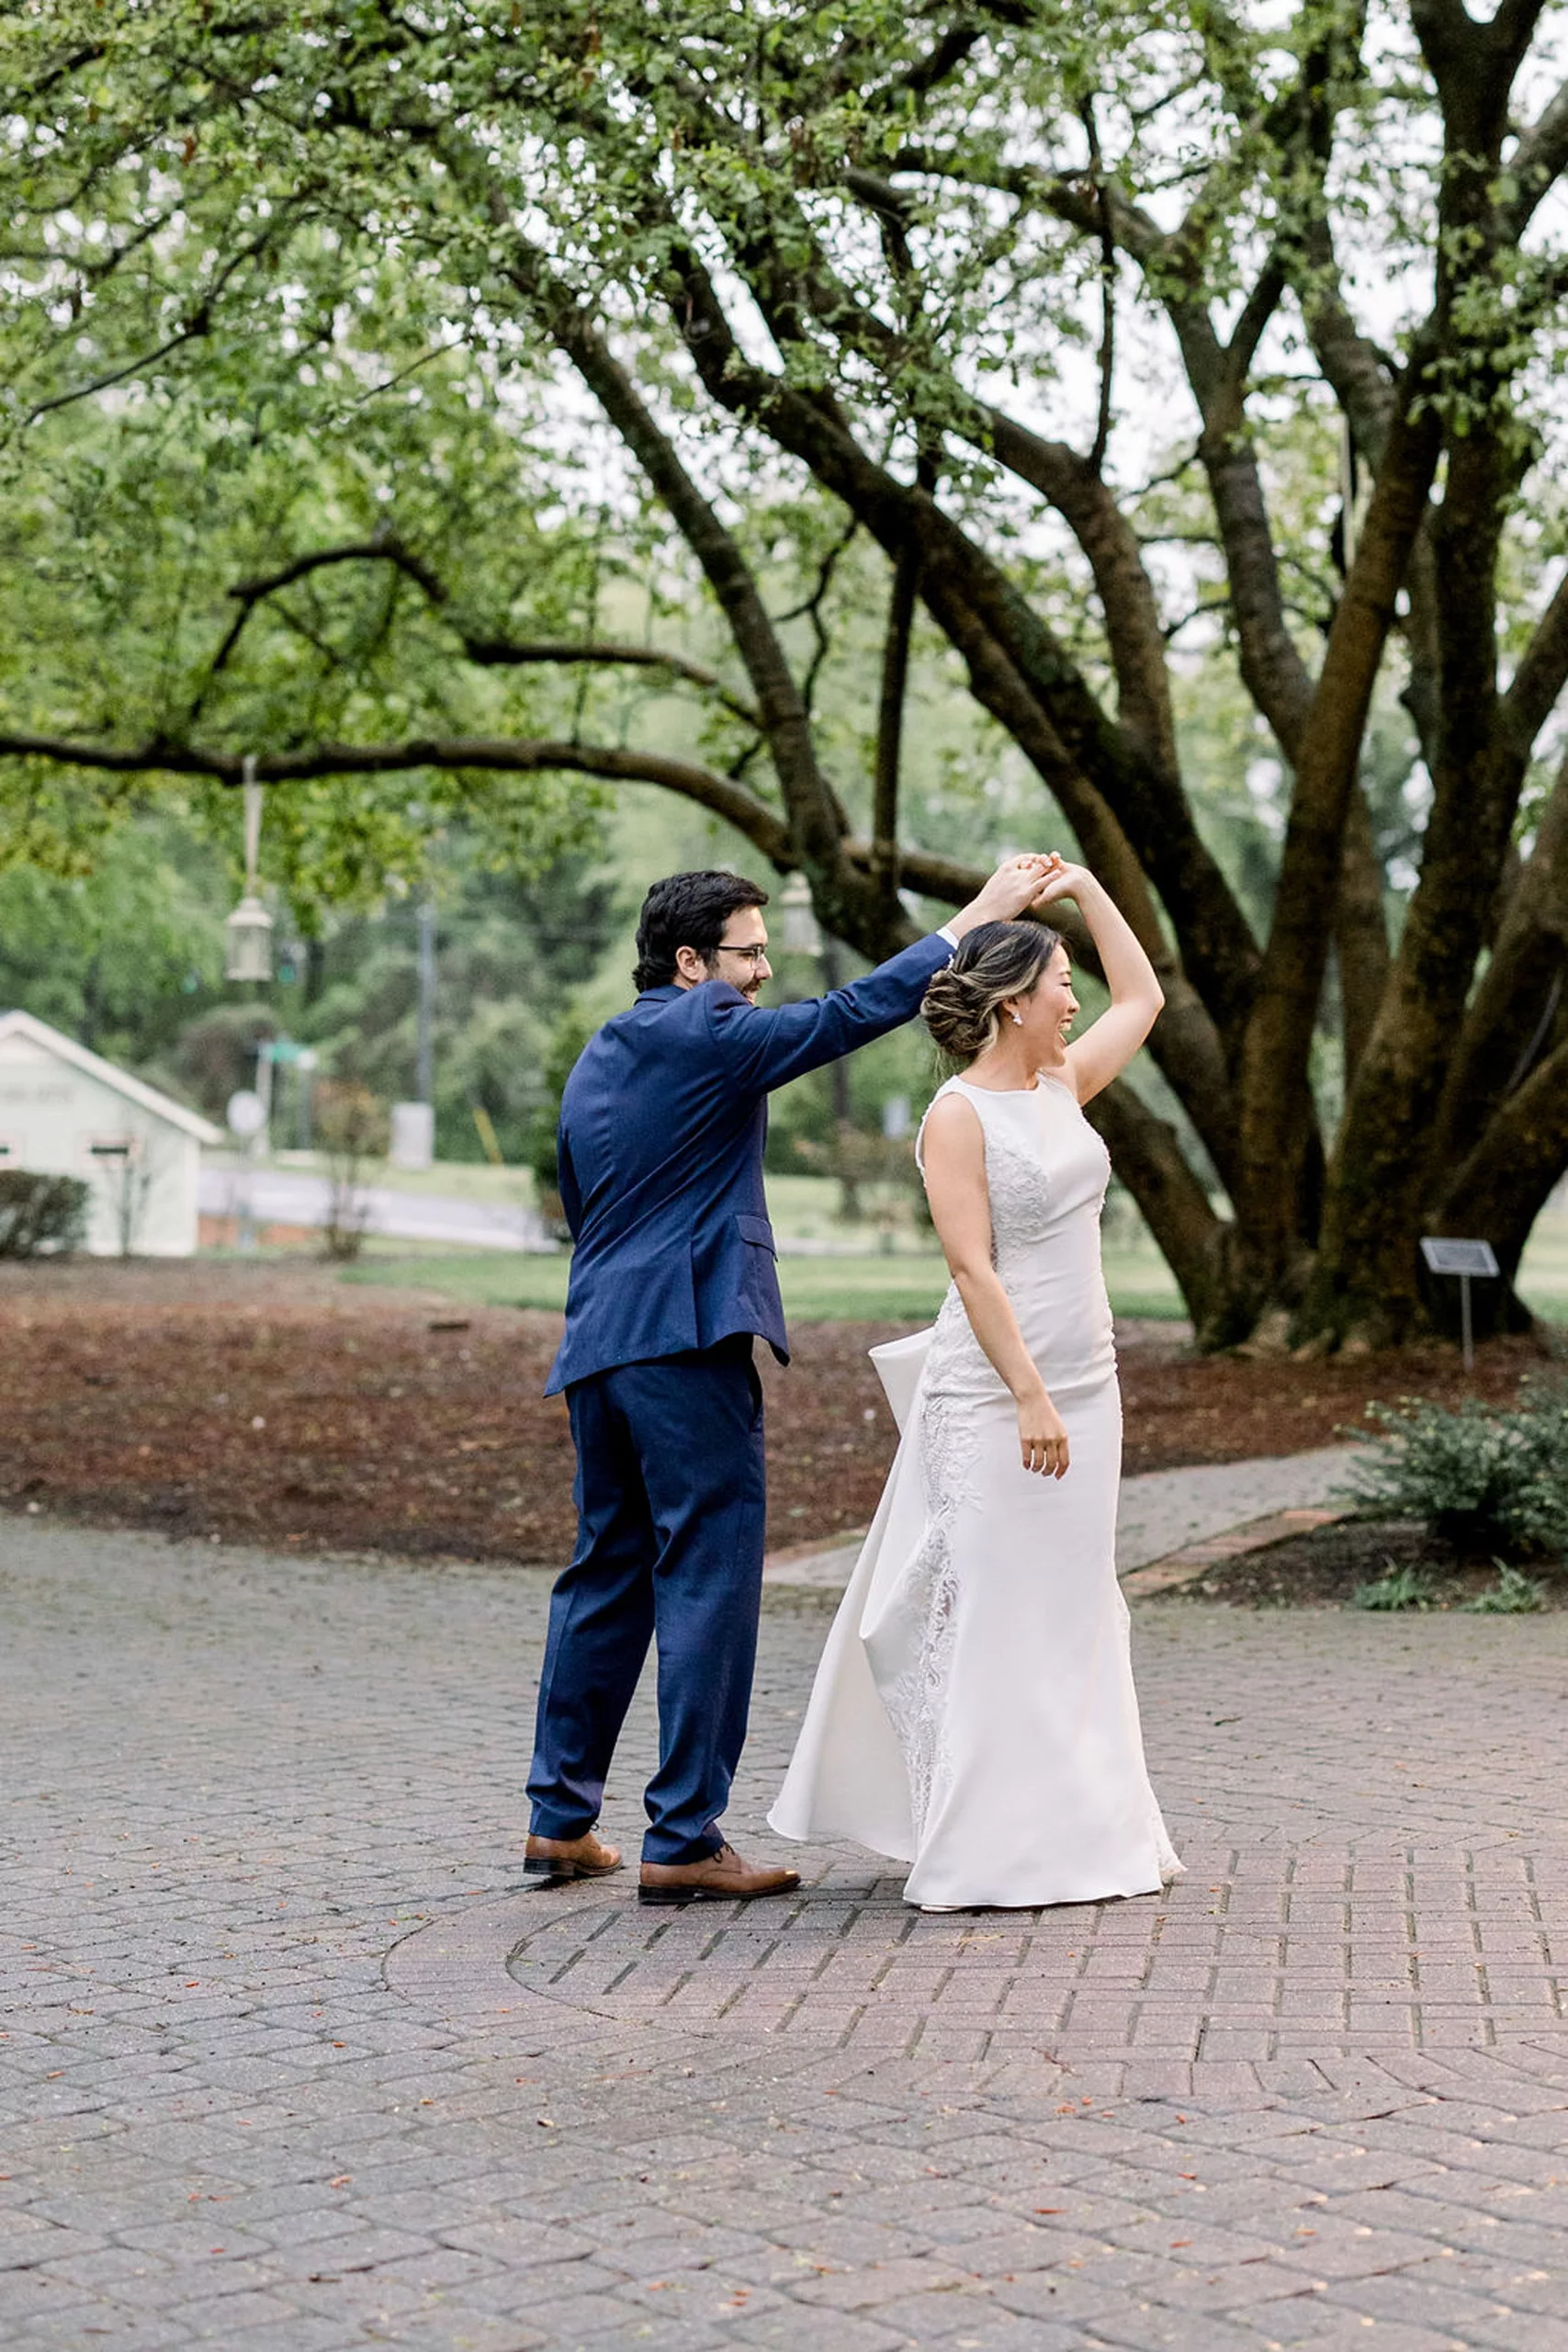 A groom in a blue suit twirls his bride on a stone patio under a large tree at the payne-corley house wedding venue